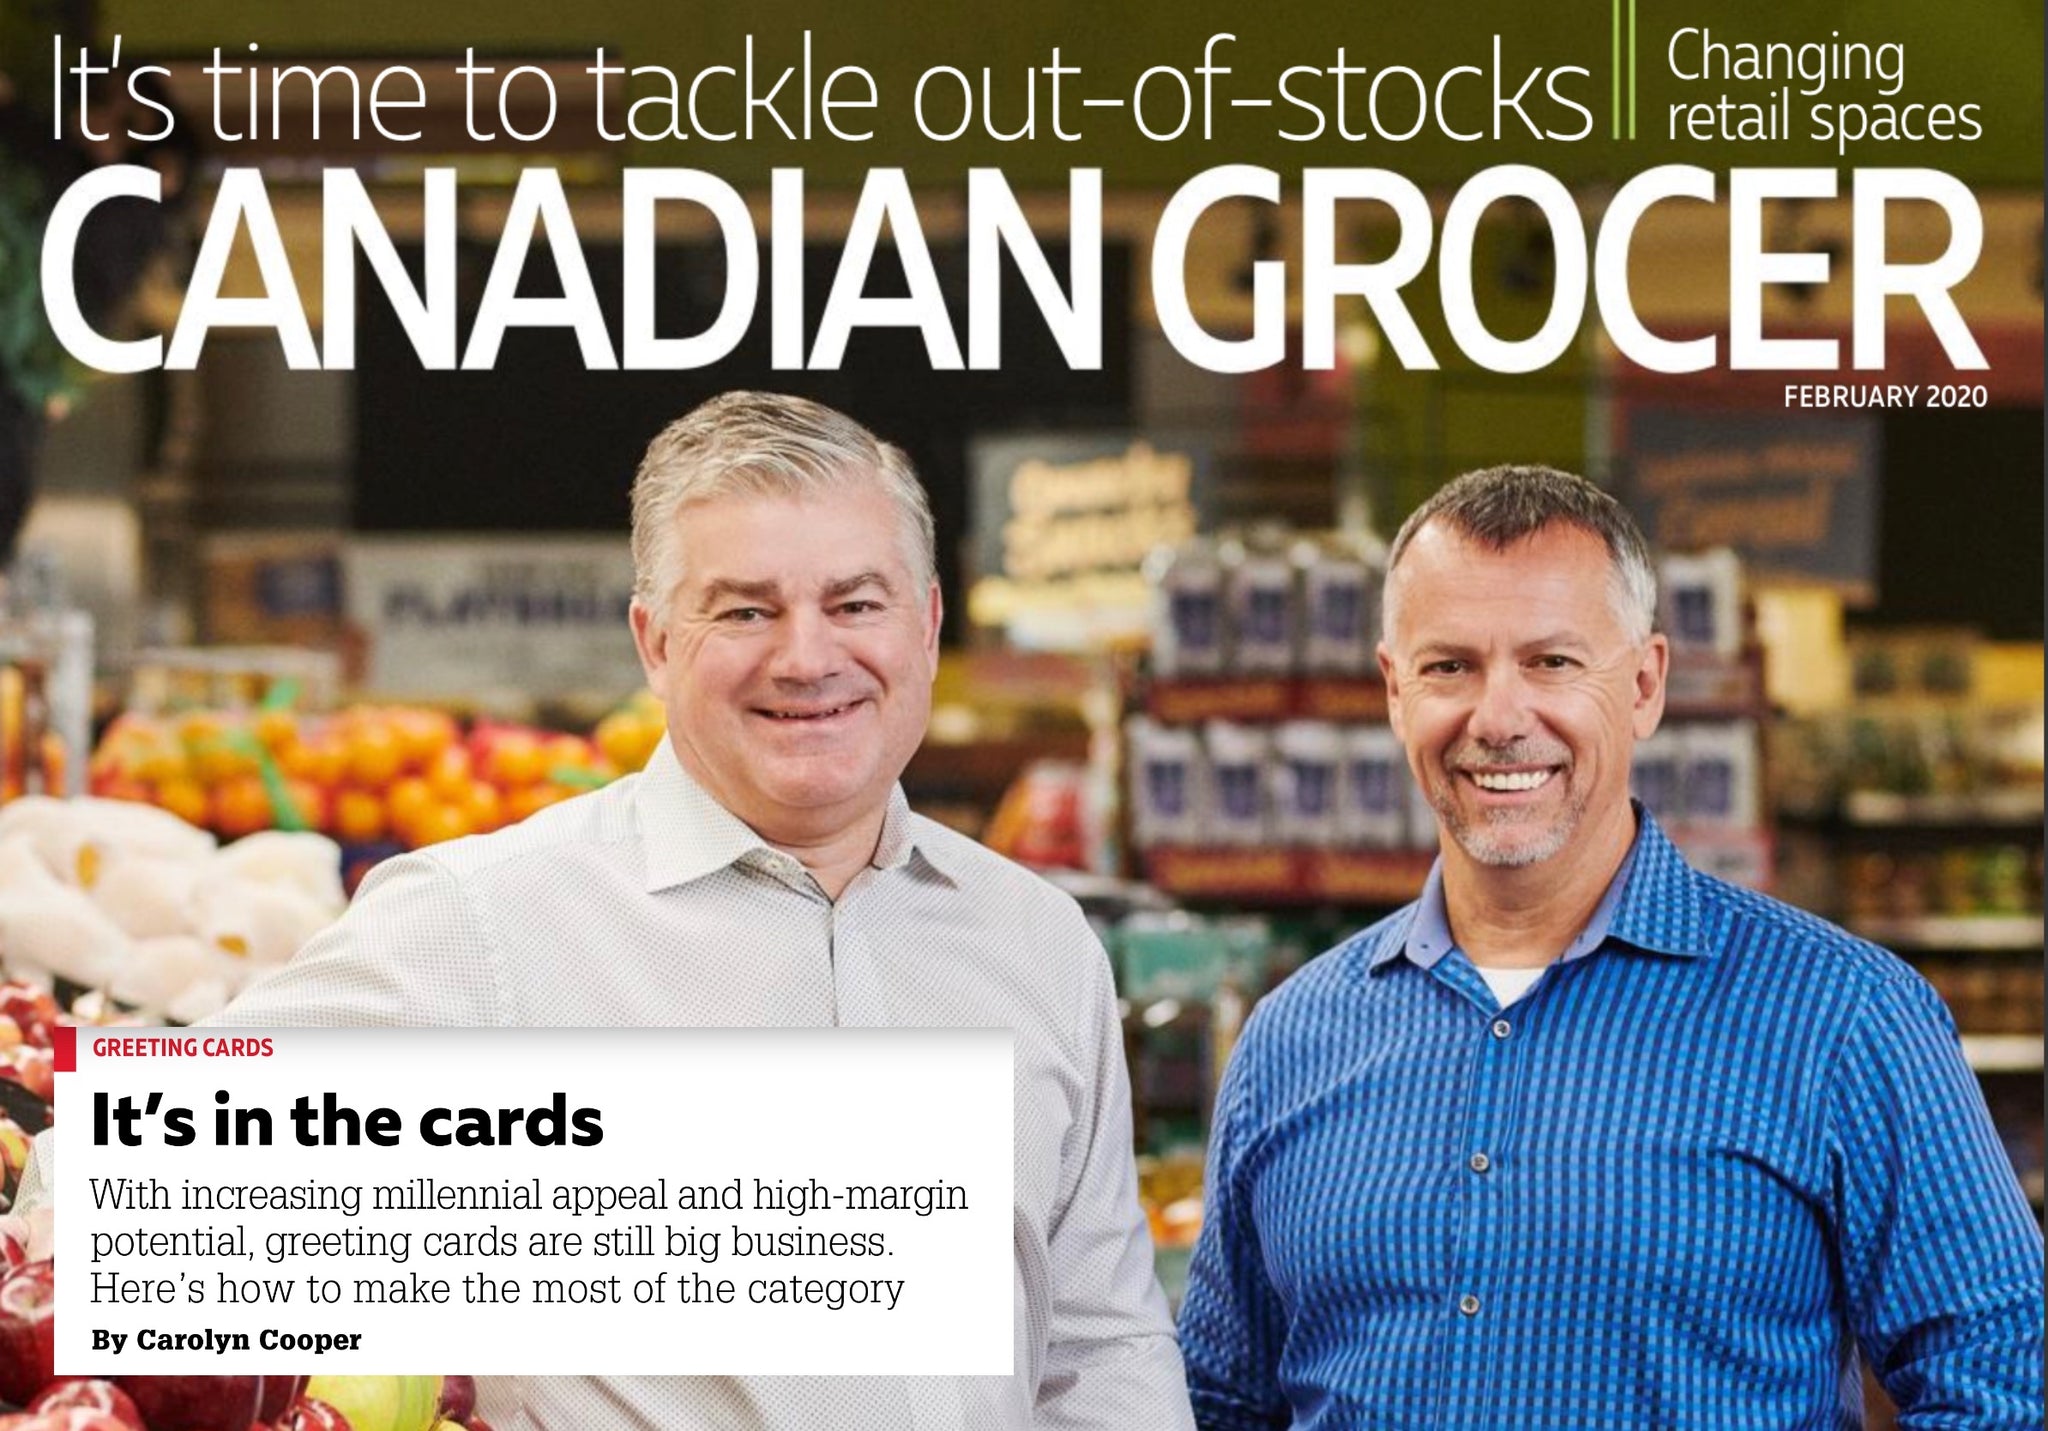 Canadian Grocer